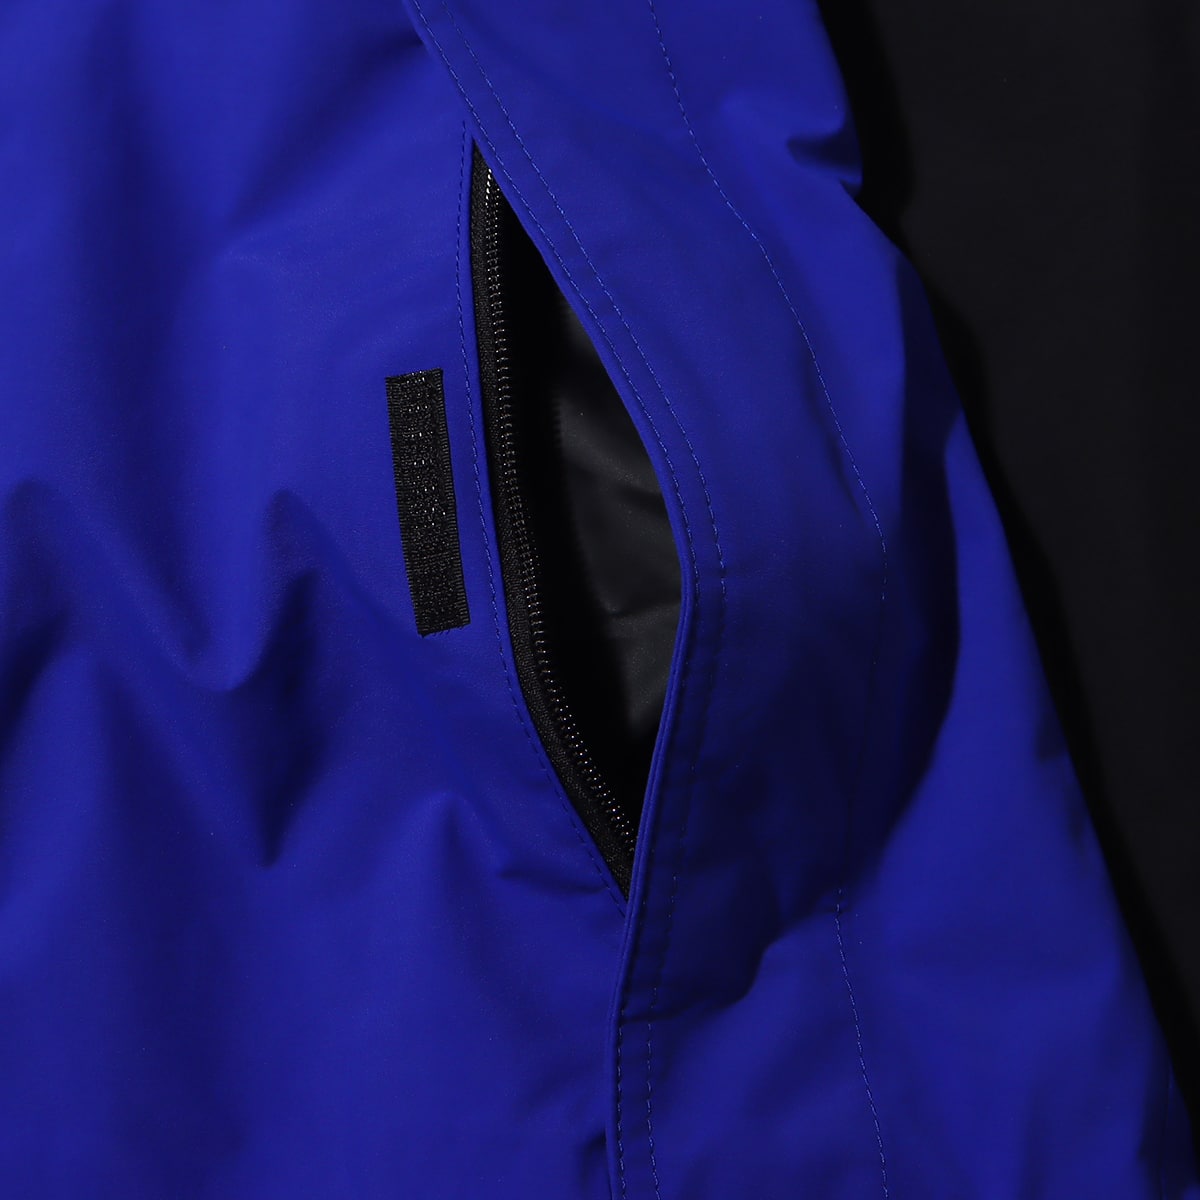 THE NORTH FACE MOUNTAIN LIGHT JACKET ラピスブルー 22FW-I